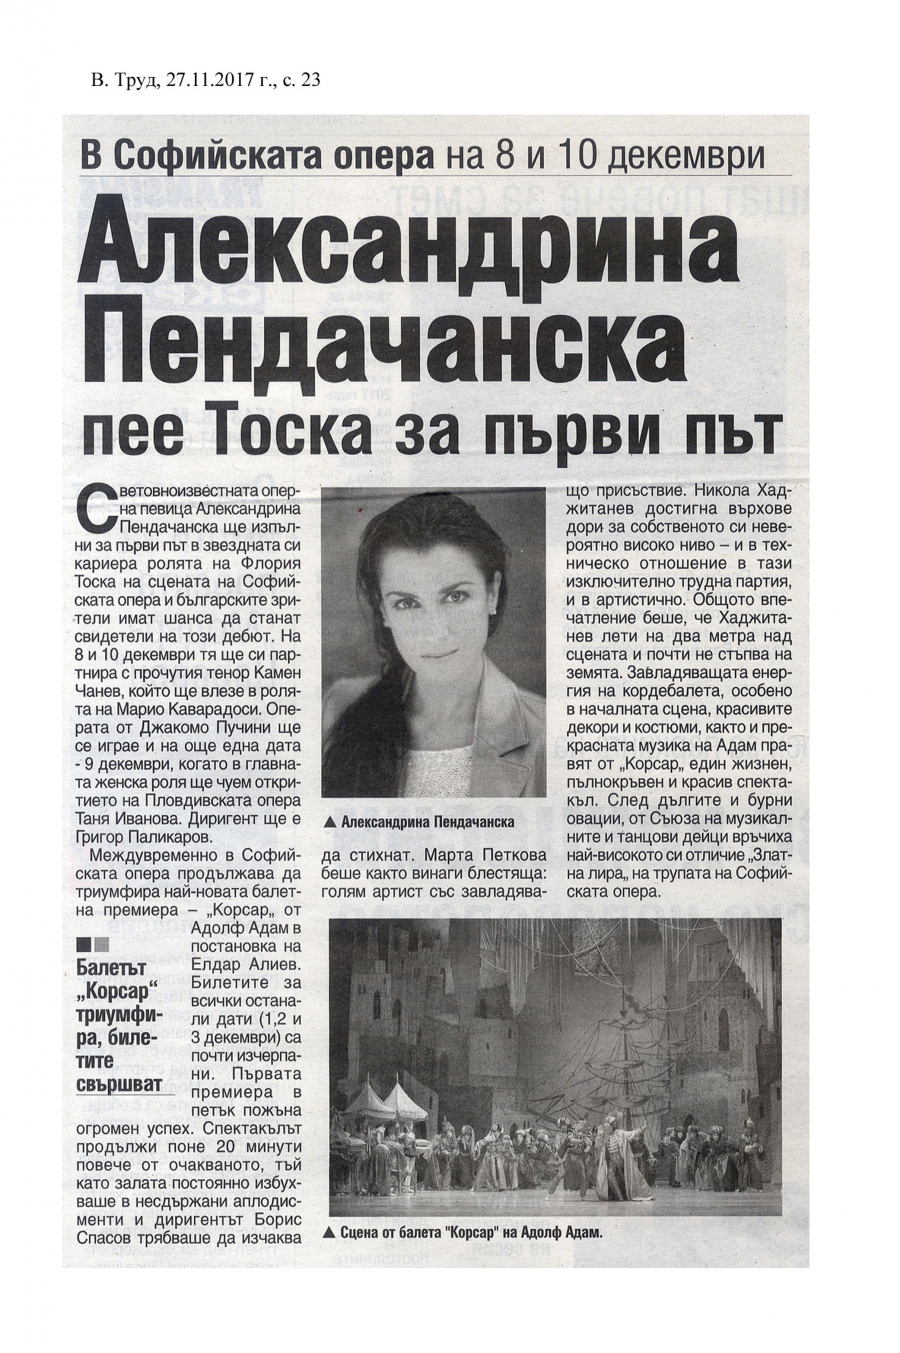 Newspaper “TRUD” – Alexandrina Pendatchanska will sing Tosca for the first time